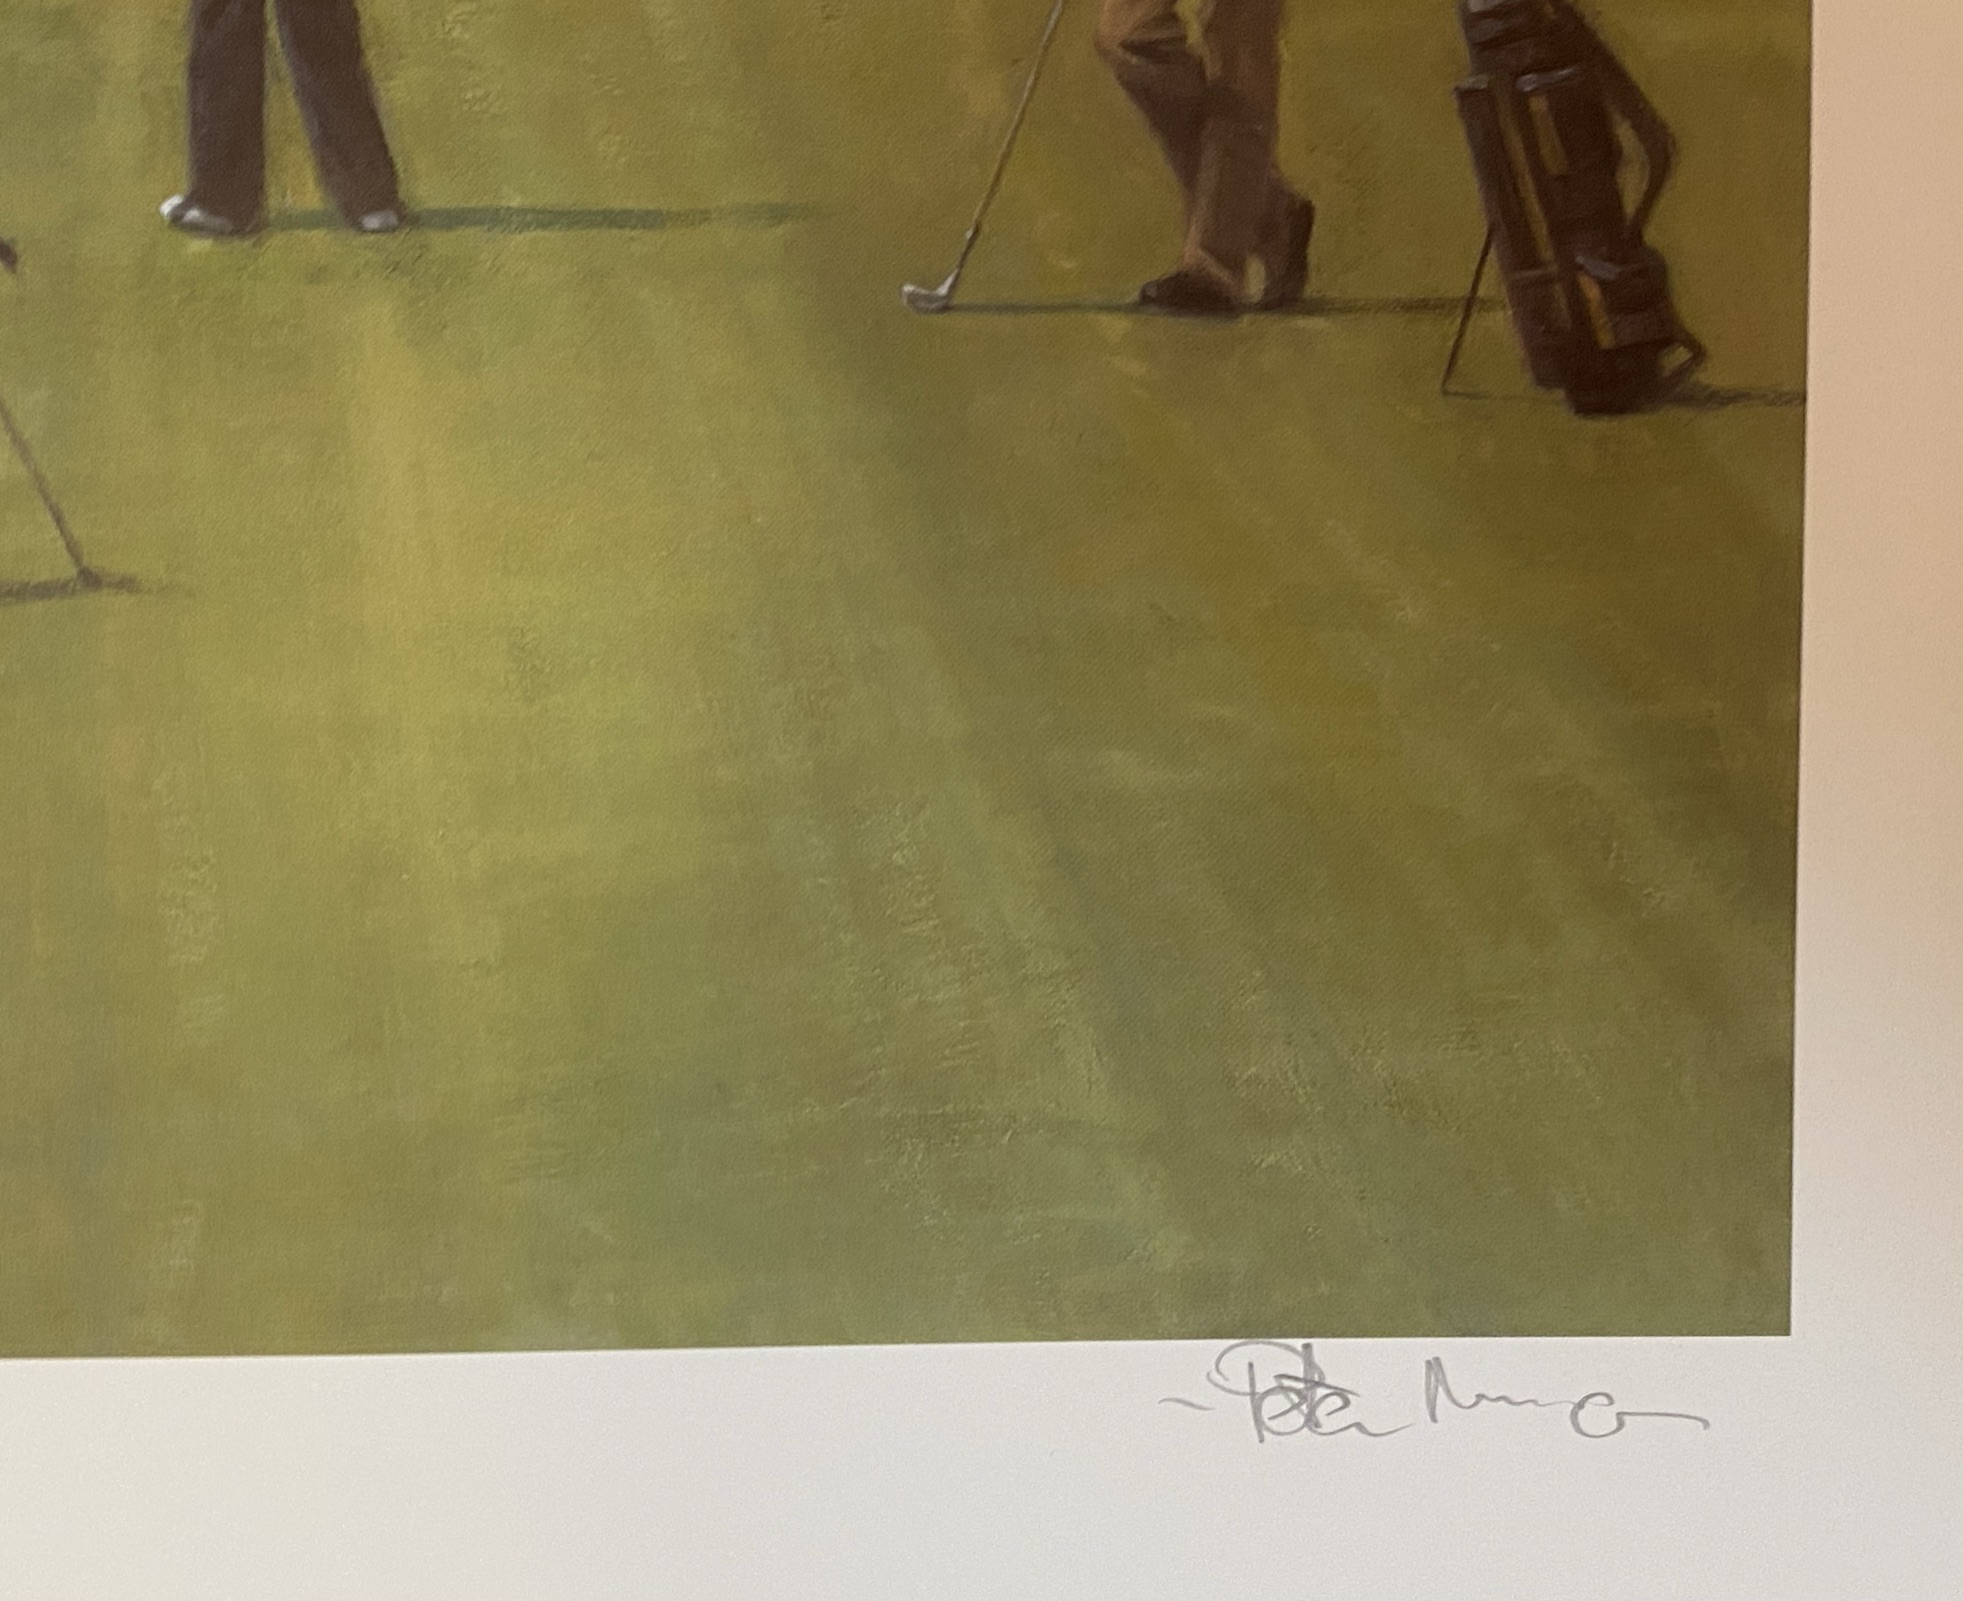 K Club 7th golfing print signed A/P by Scottish artist Peter Munro - Image 4 of 4